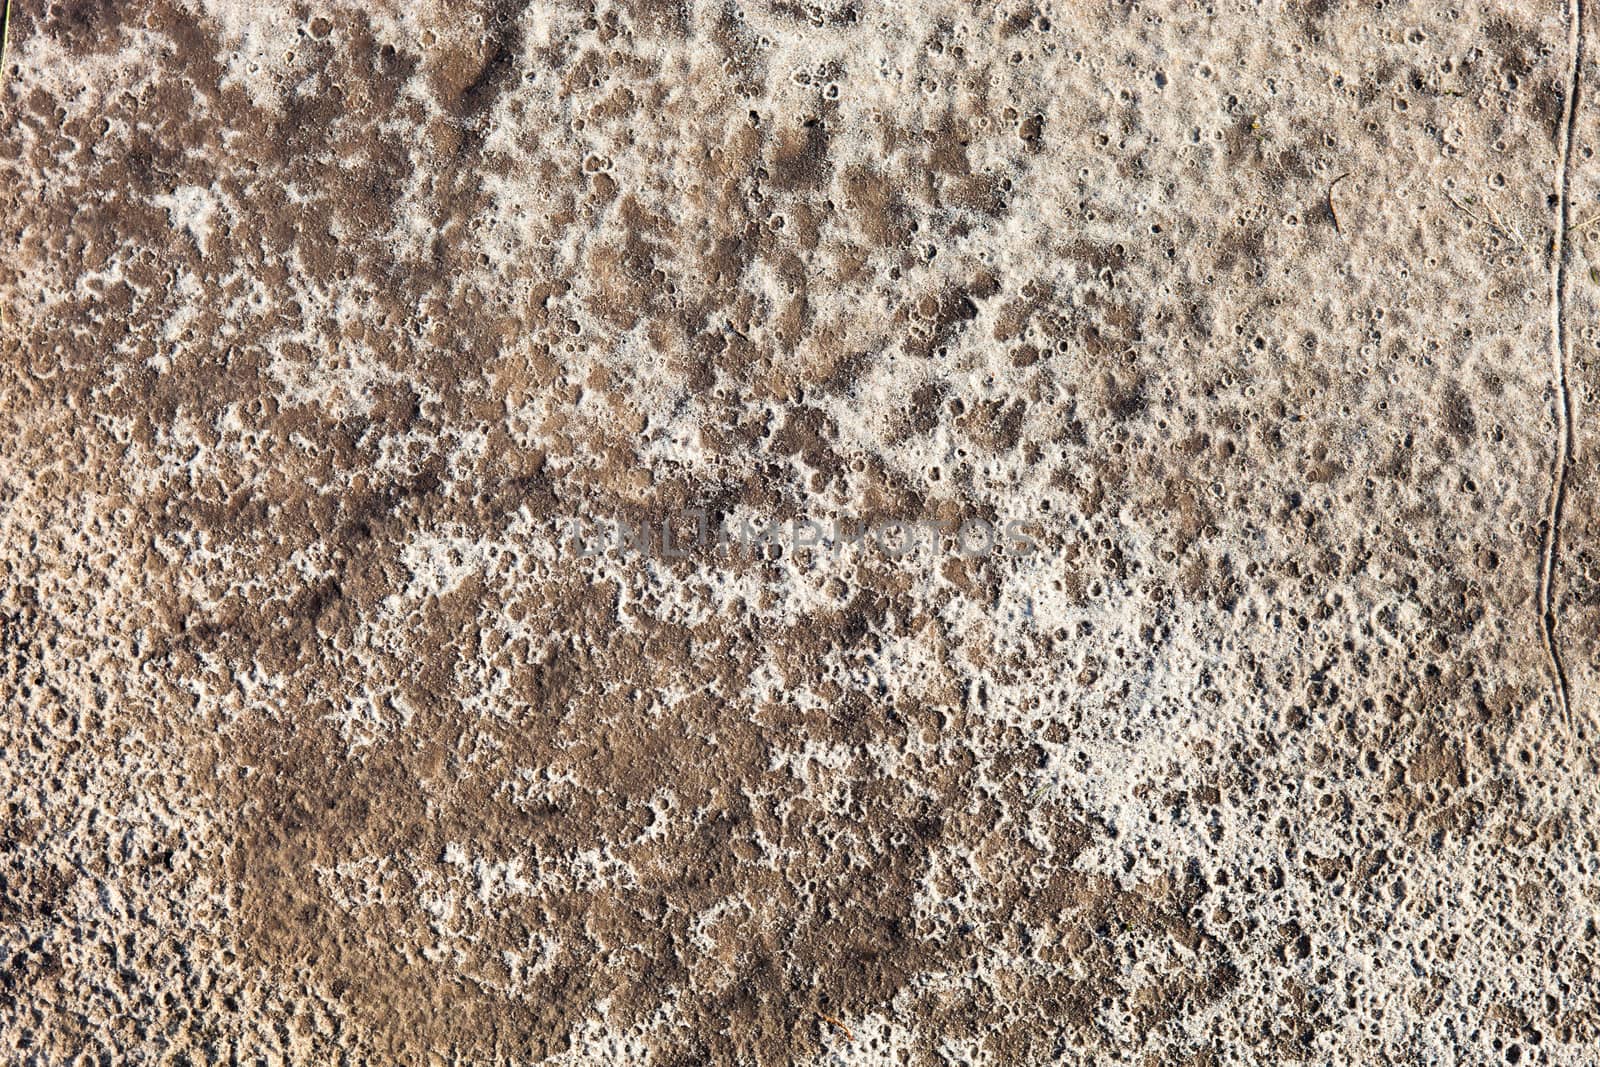 Sand surface after the rain with the visible traces of the raindrops